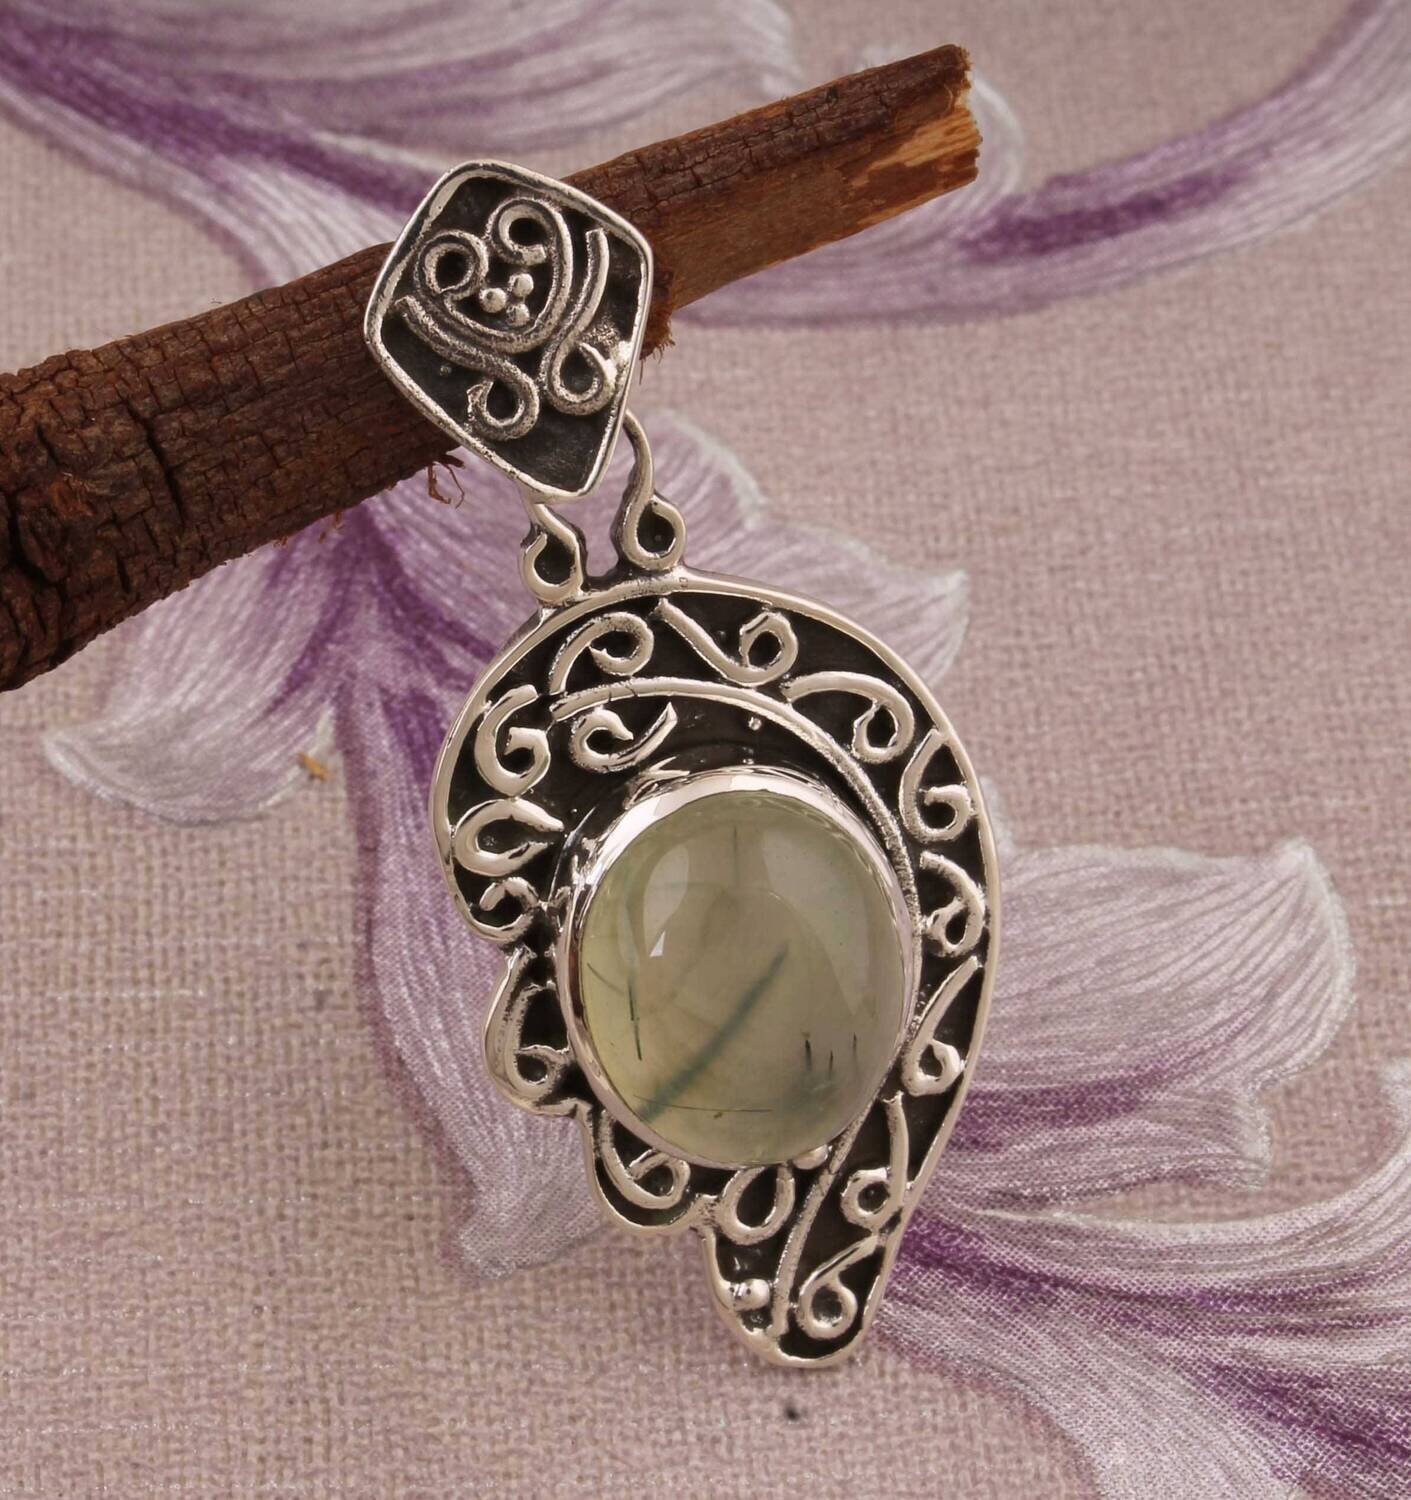 Natural Amazing Prehnite AAA+Quality Gemstone Pendant 925-Antique Solid Silver Pendant,Sterling Silver Pendant,Leaf Pendant,Gift for Her